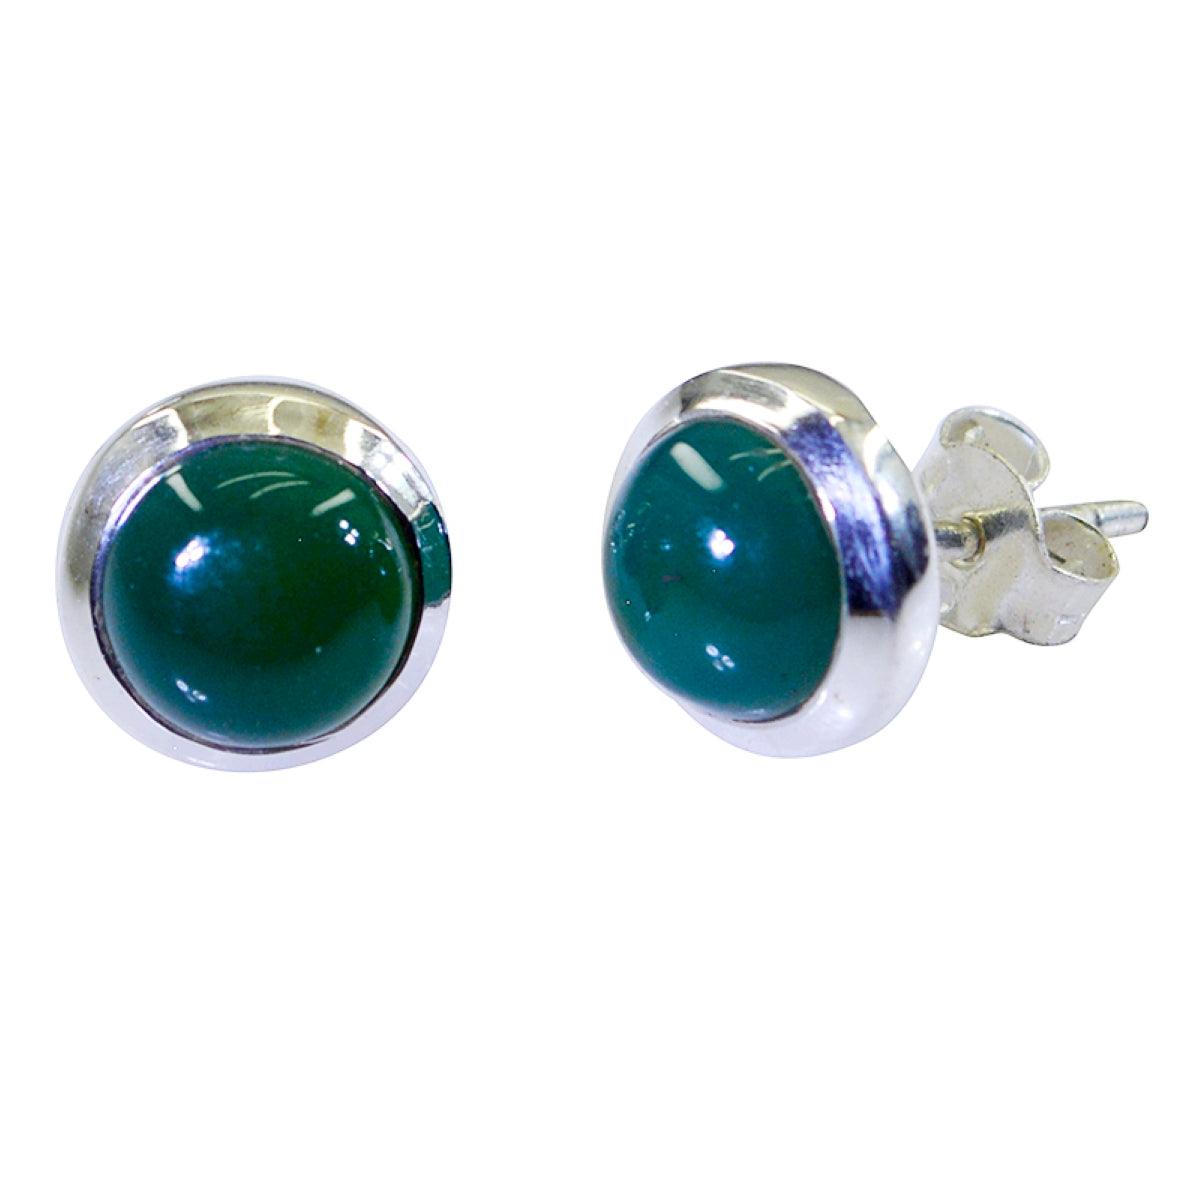 Riyo Real Gemstones round Cabochon Green Onyx Silver Earring gift for grandmother